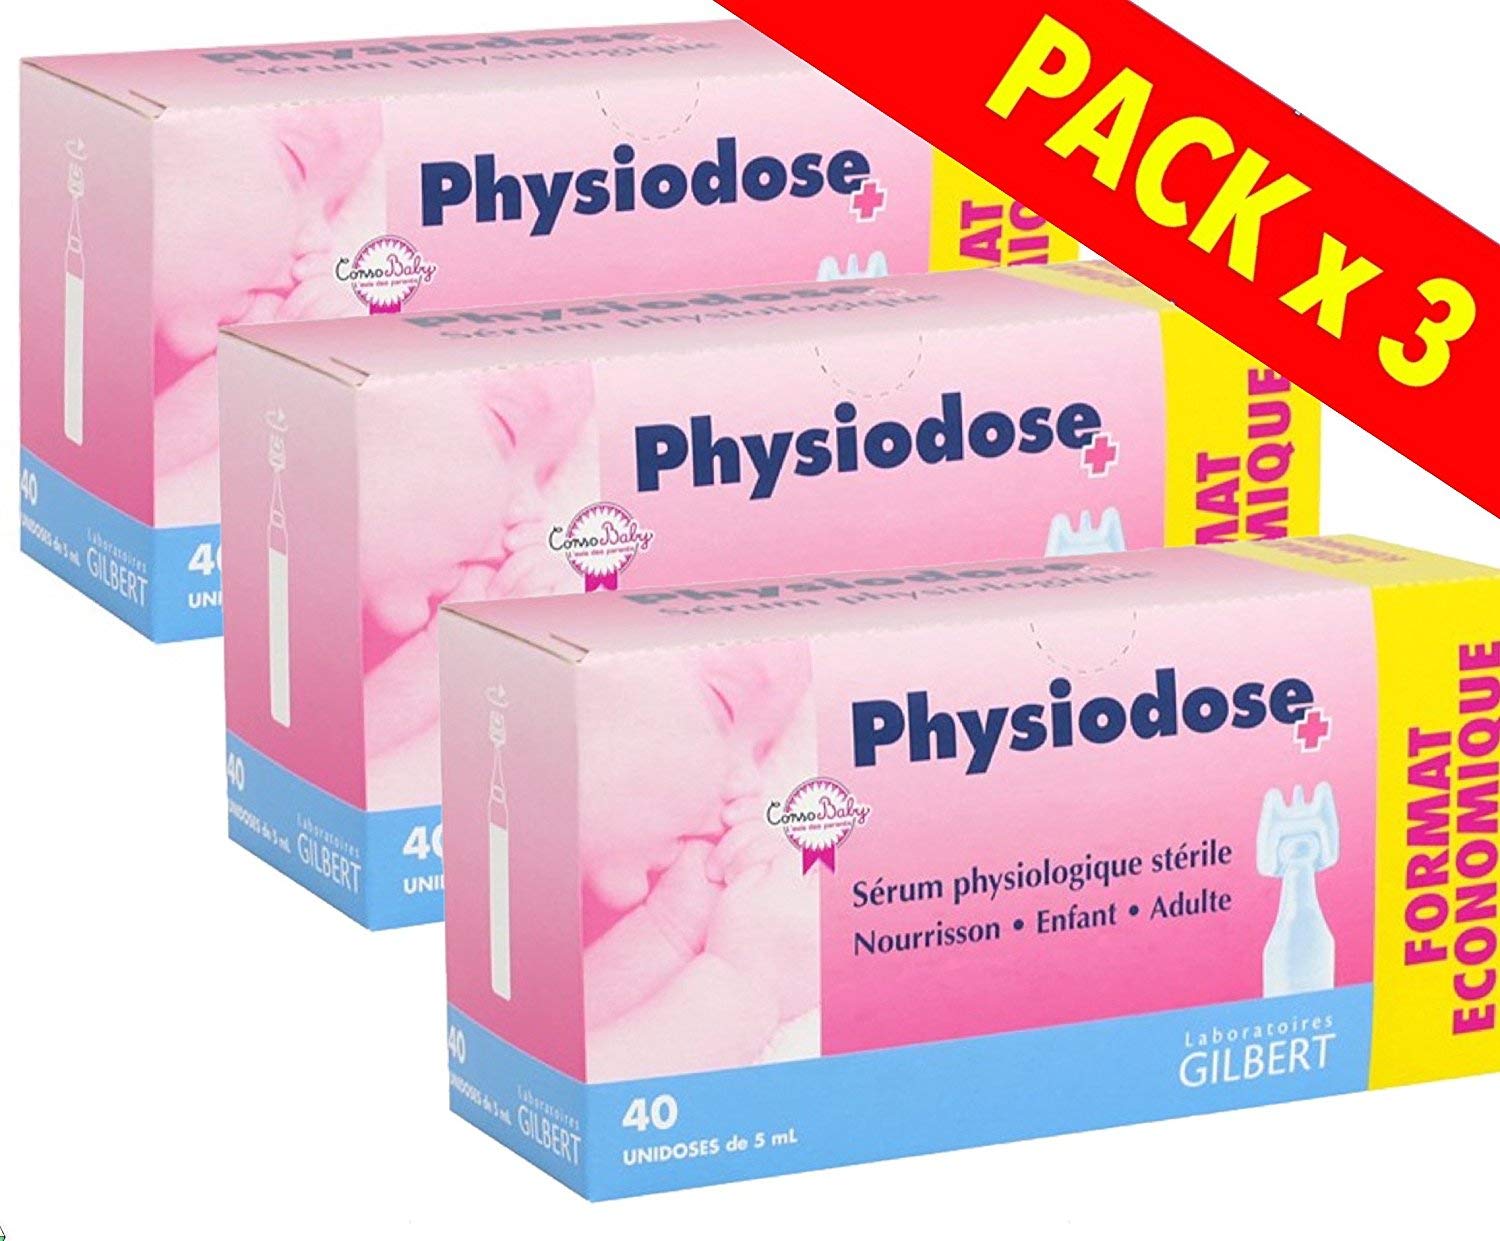 Physiodose Physiological Serum - 3 Boxes of 40 Single Doses